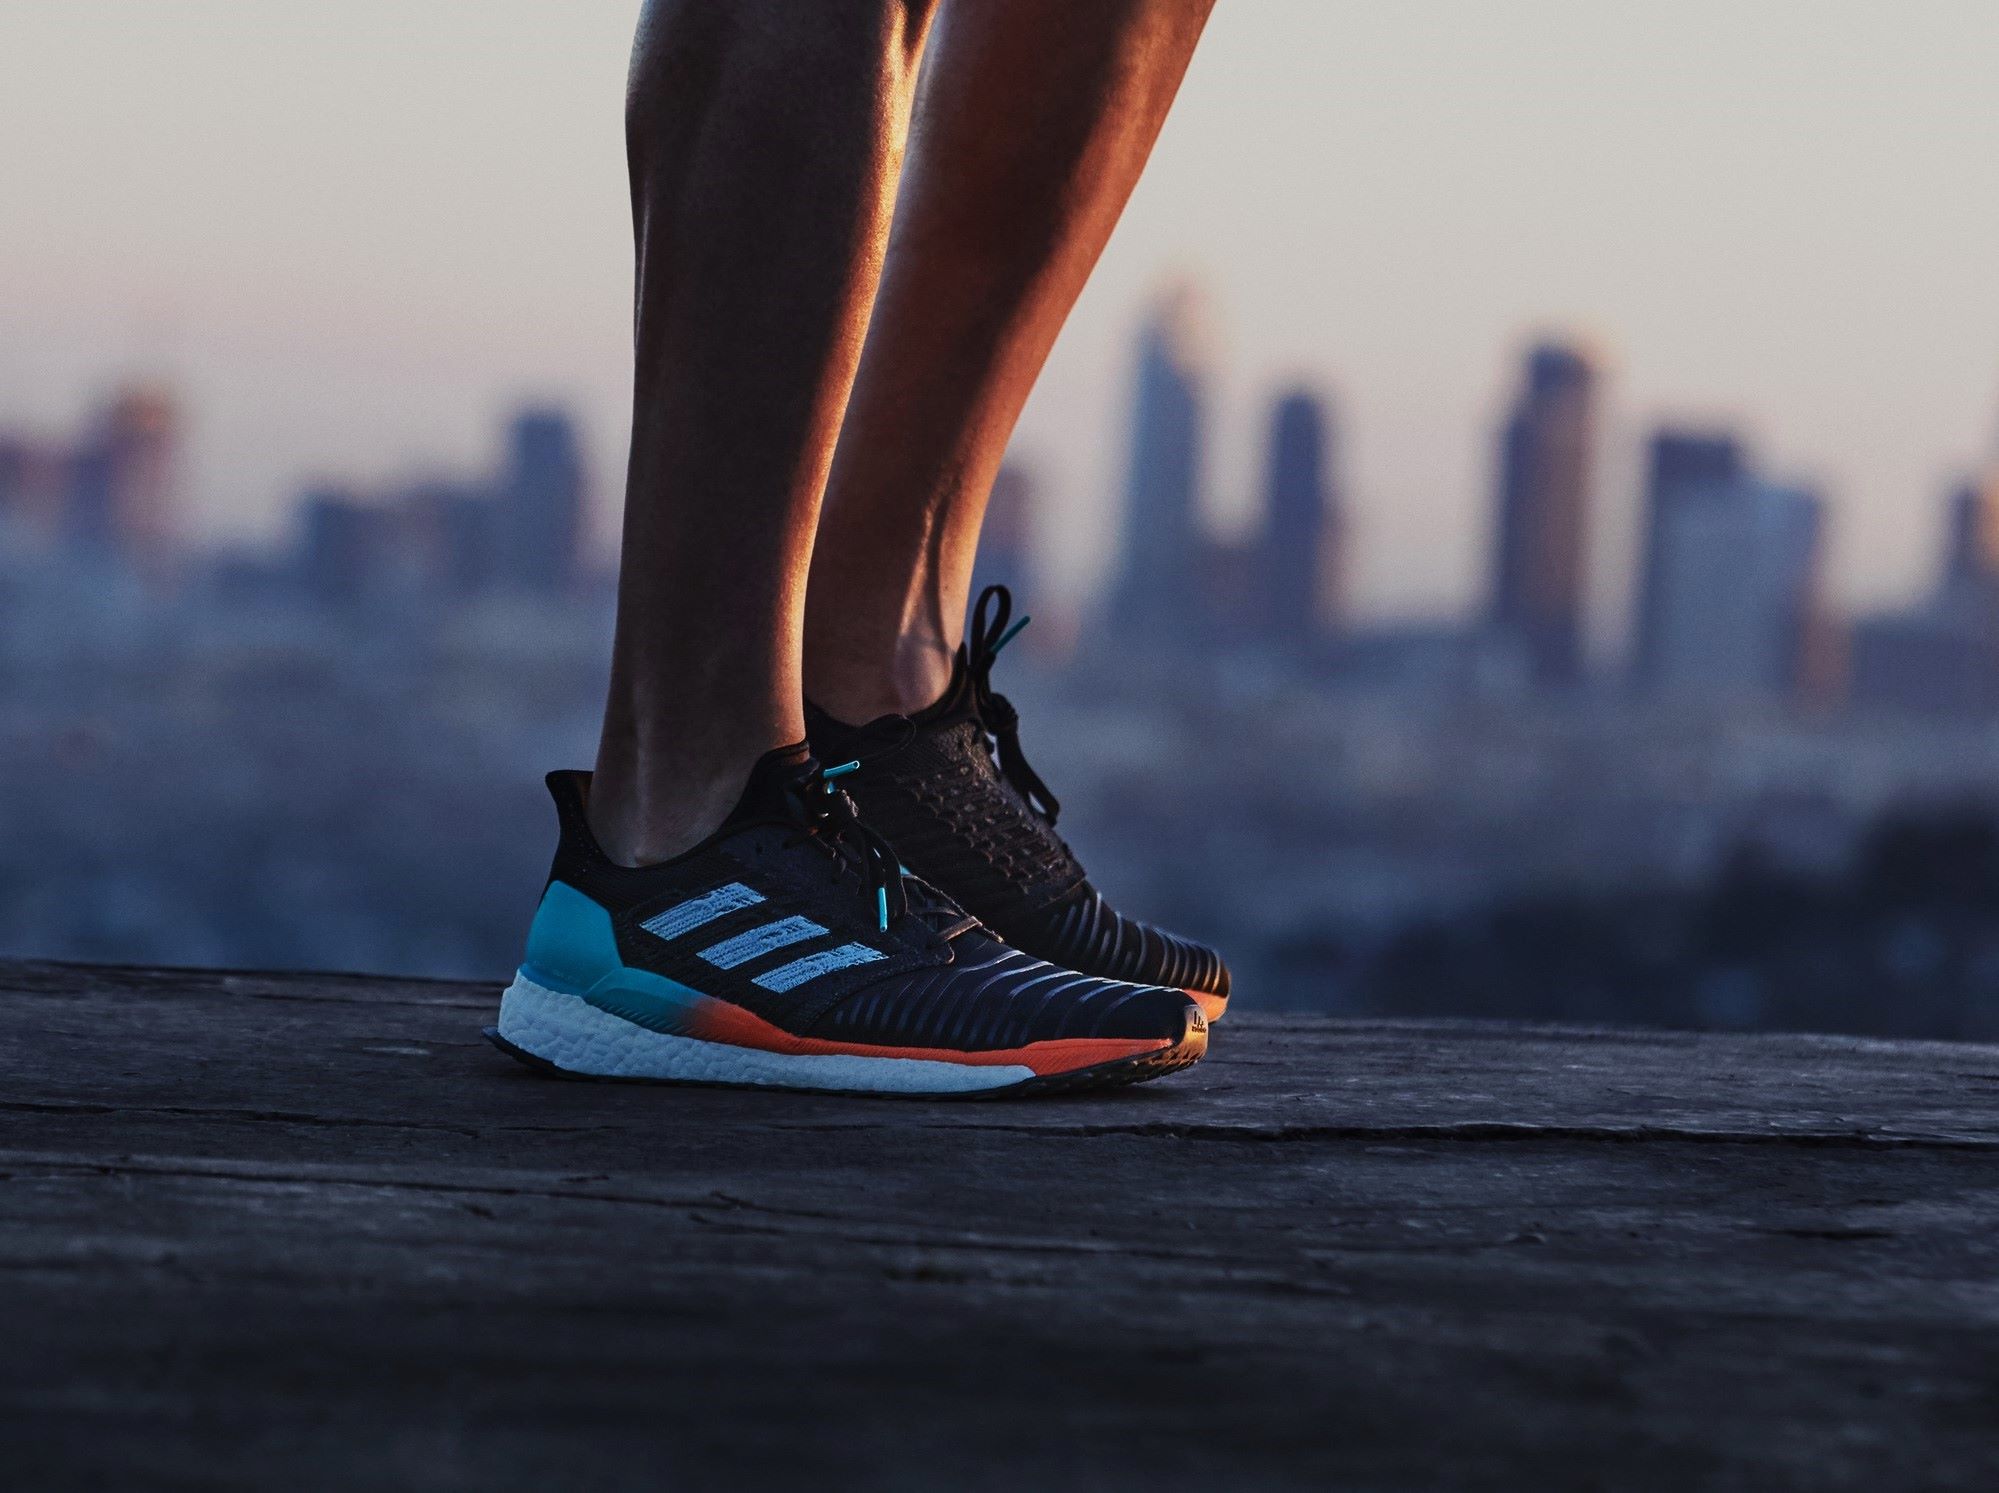 Reviewing The Adidas SolarBOOST: Our Experience Running In The Latest Running Shoe